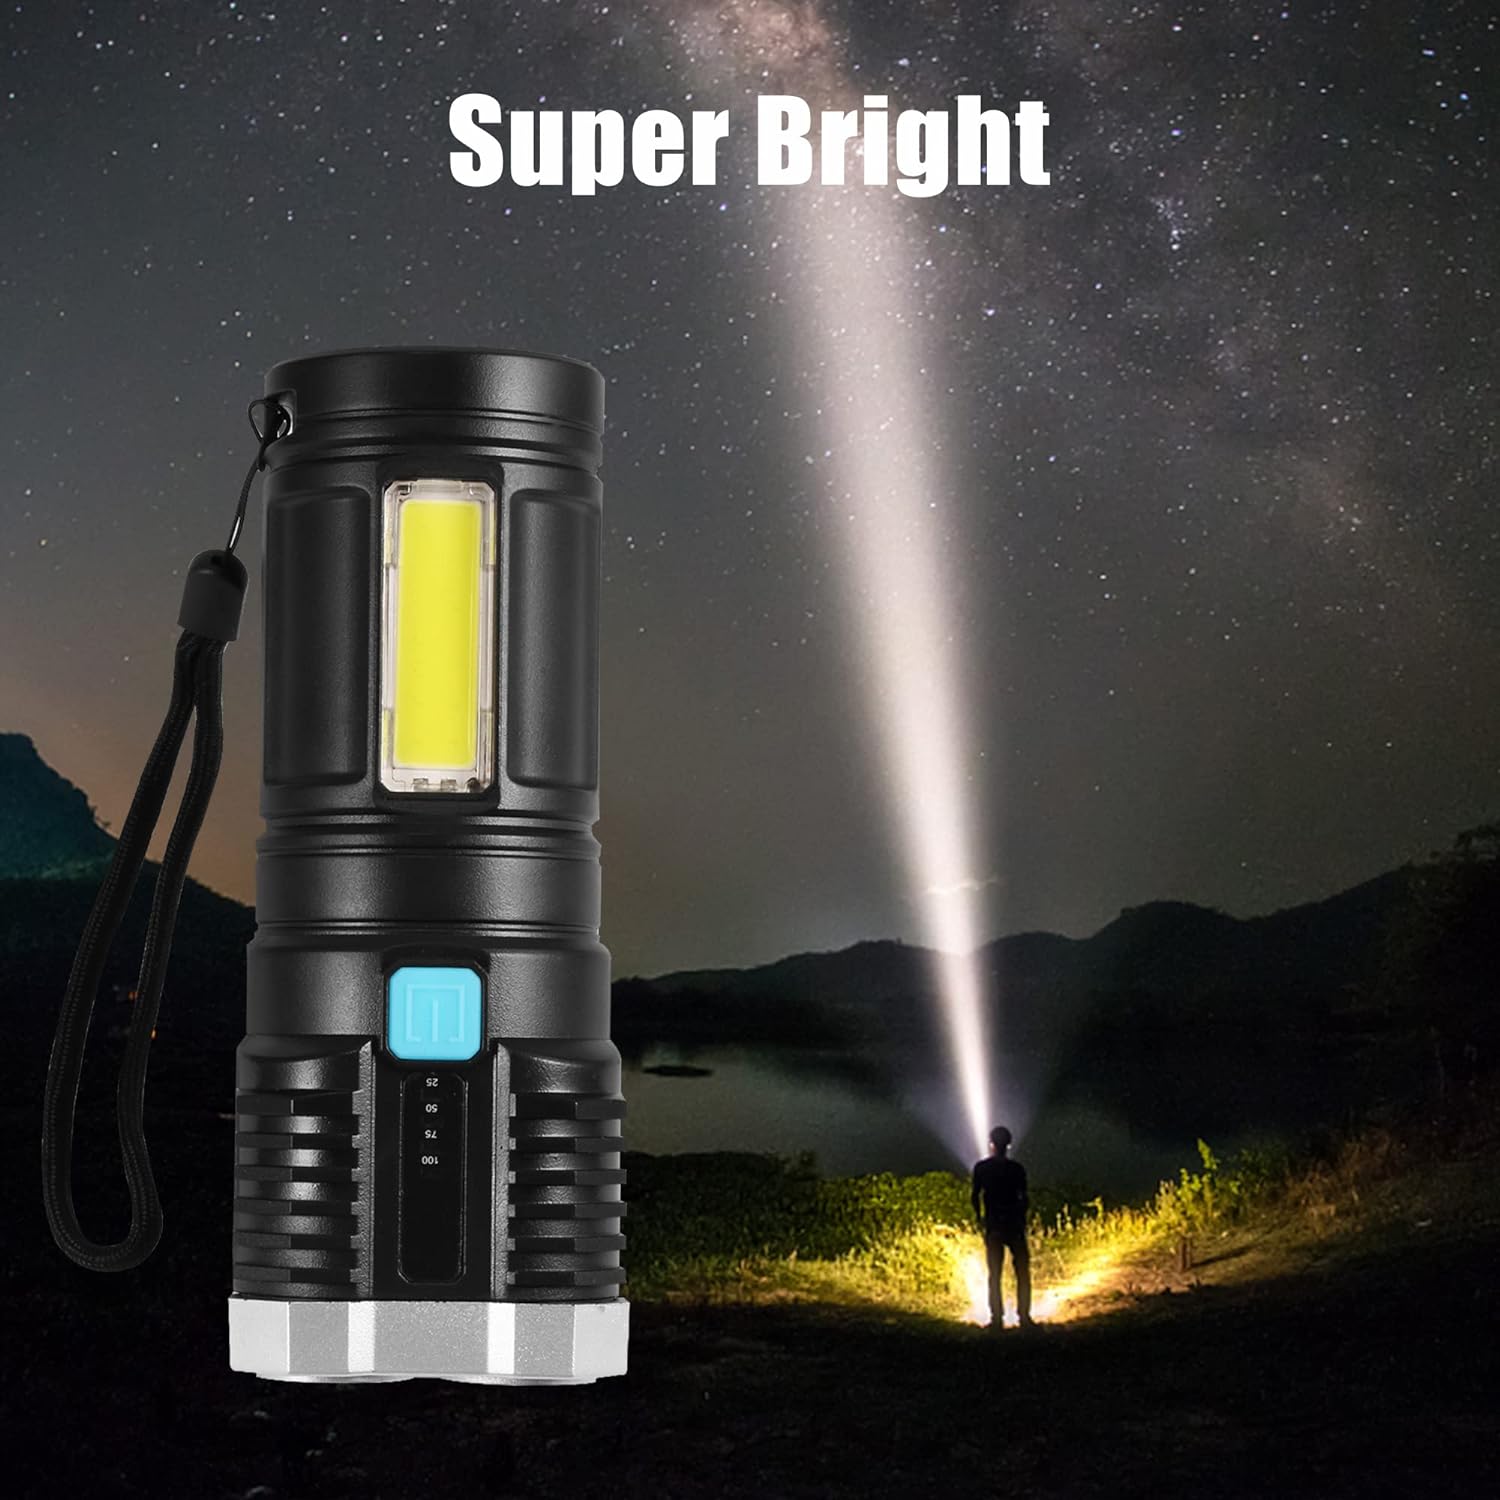 9370 Multifunctional Strong 4 LED Torch Light, Portable Rechargeable Flashlight Long Distance Beam Range 800 Lumens COB Light 4 Mode Emergency for Hiking, Walking, Camping (4 LED Torch)